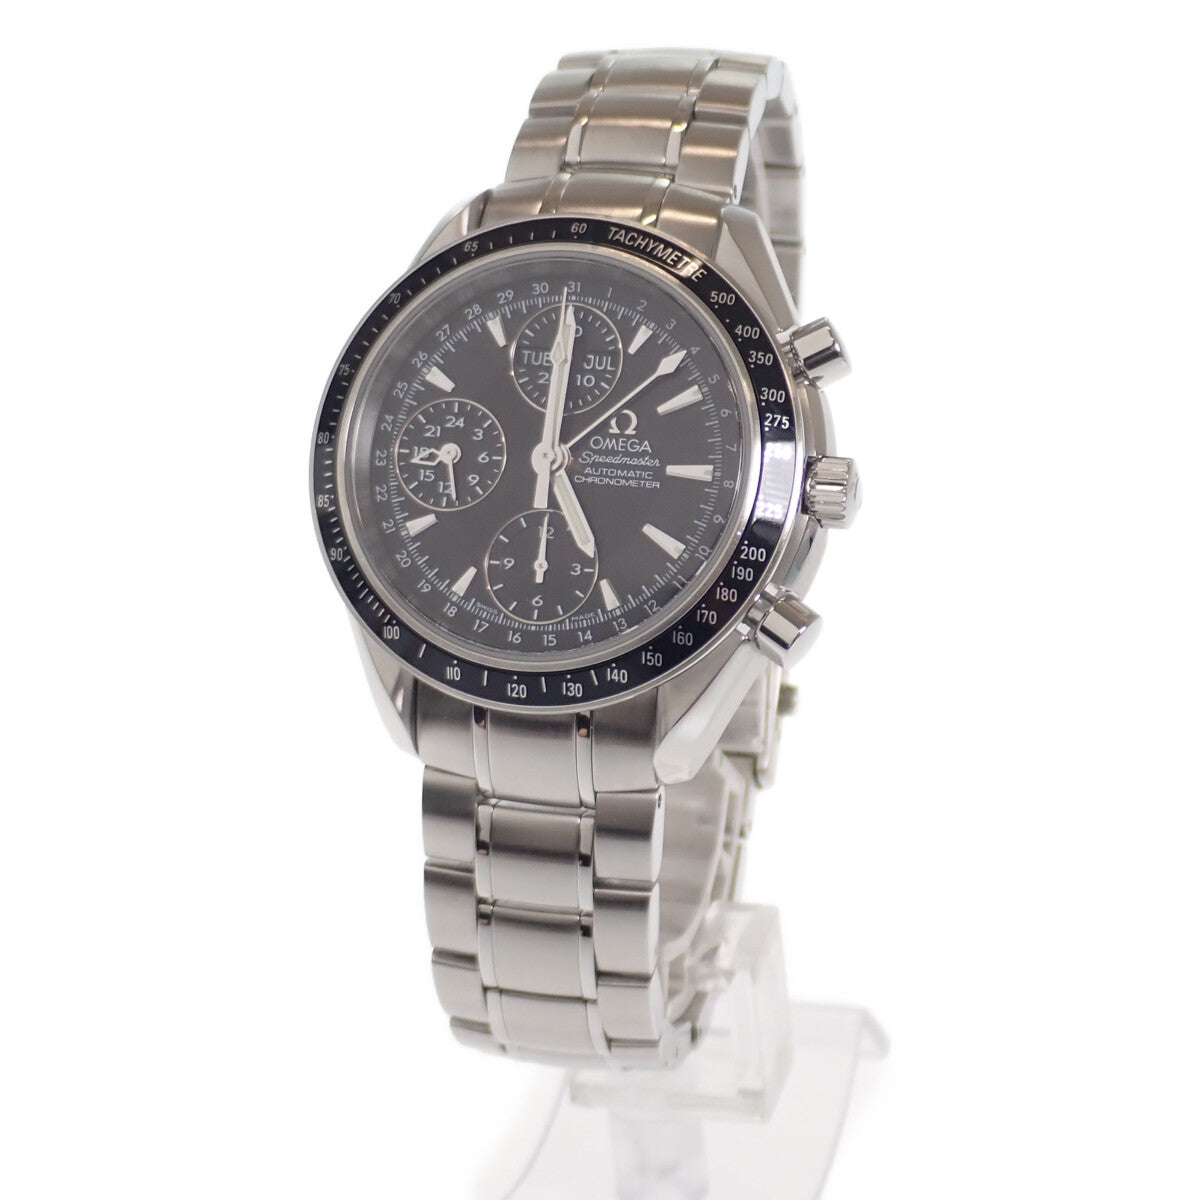 Omega Speedmaster Day-Date Triple Calendar Stainless Steel Men's Watch with Black Dial 3220.5